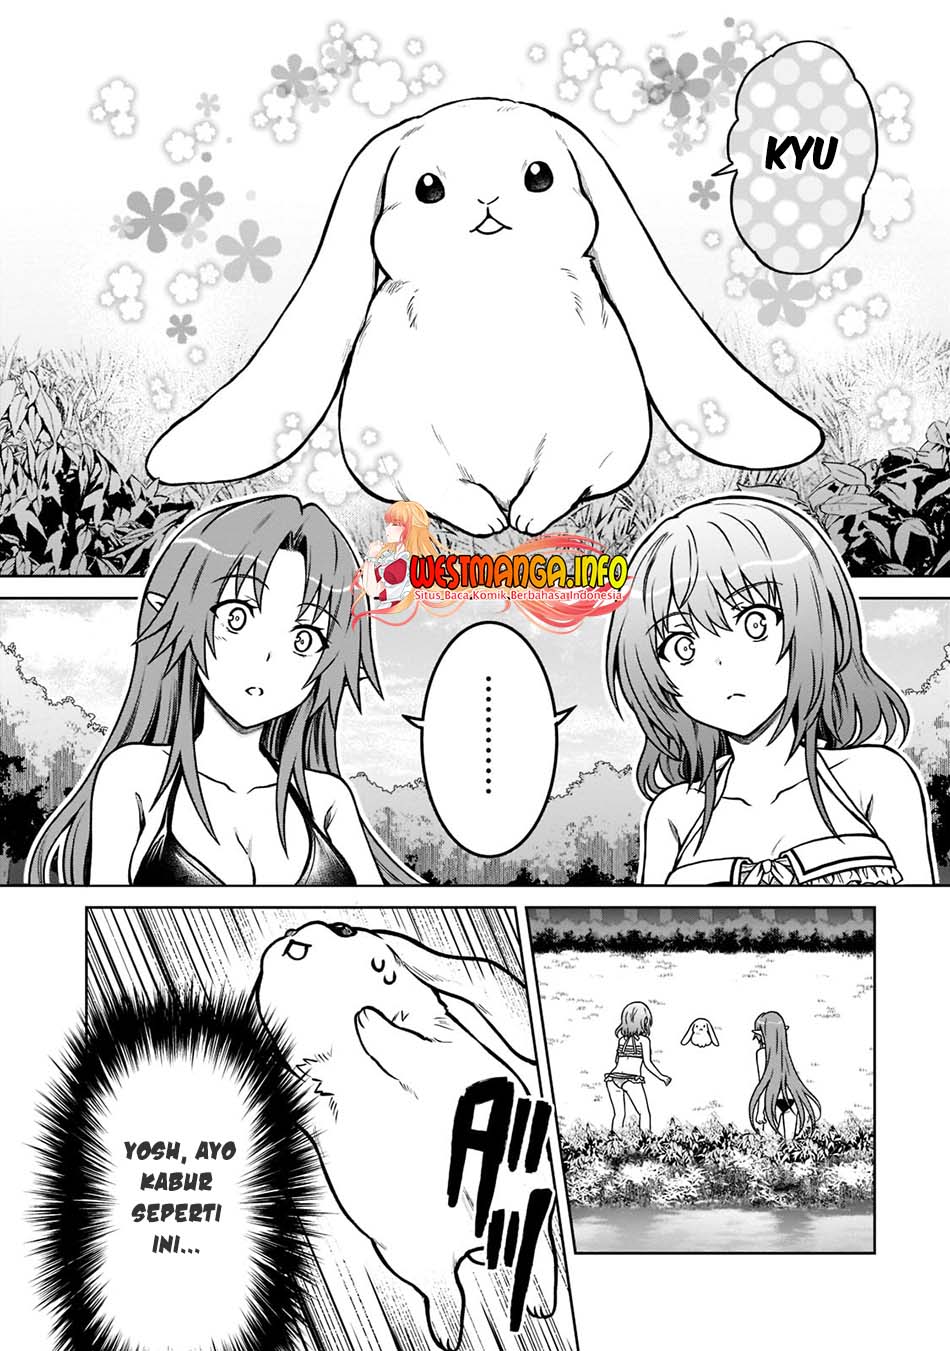 Dilarang COPAS - situs resmi www.mangacanblog.com - Komik d rank adventurer invited by a brave party and the stalking princess 008 - chapter 8 9 Indonesia d rank adventurer invited by a brave party and the stalking princess 008 - chapter 8 Terbaru 14|Baca Manga Komik Indonesia|Mangacan